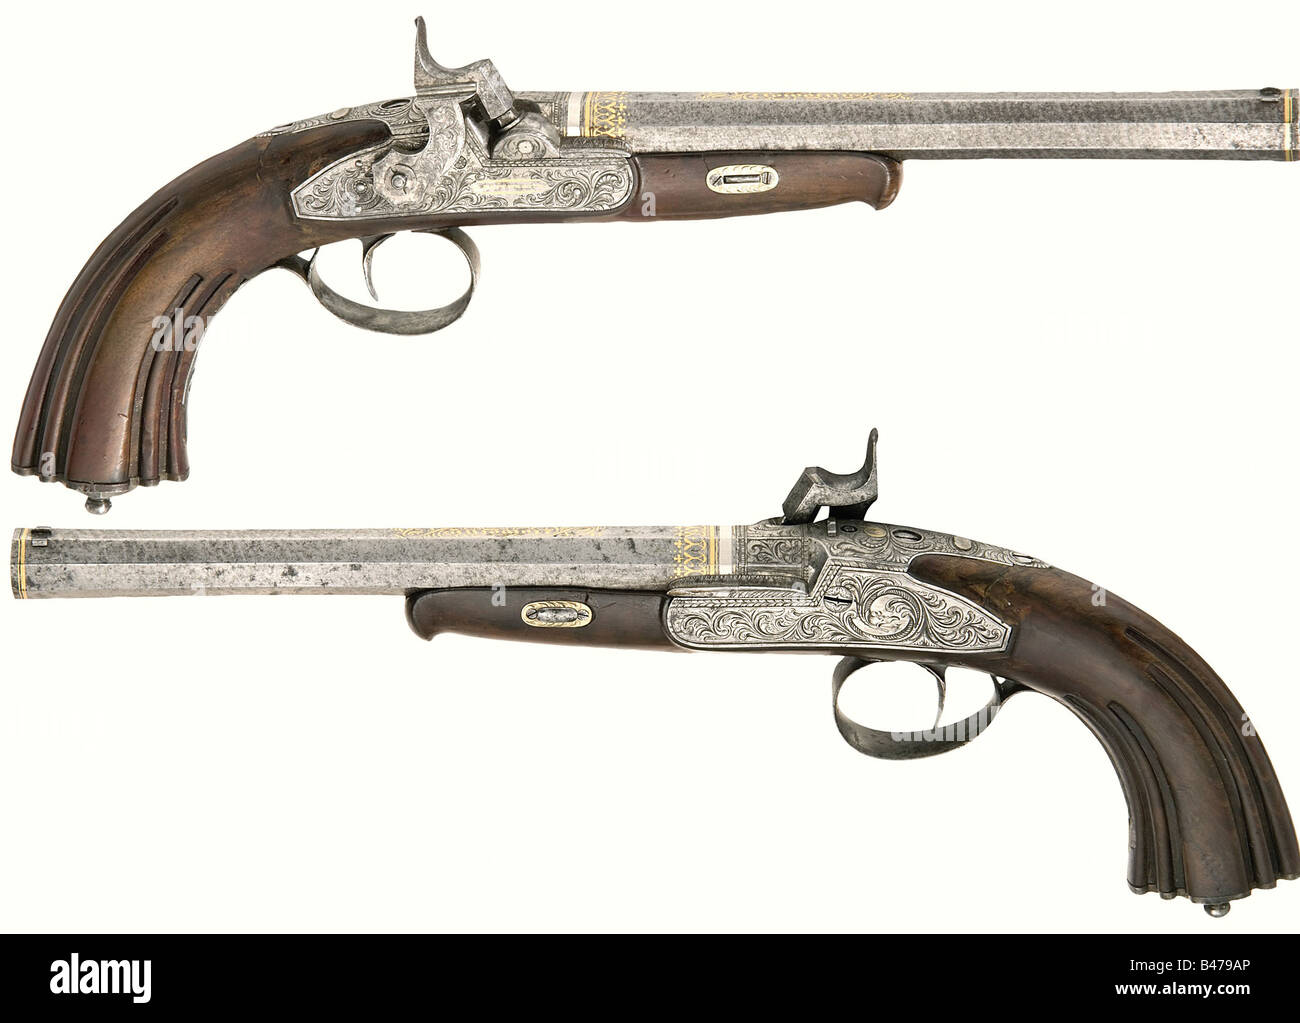 A cased pair of percussion pistols, Matthias Nowotny, Leitmeritz/Bohemia before 1838. Octagonal, slightly swamped Damascus barrels with hook breeches and microgroove rifling in 14 mm calibre. Each has a dovetailed iron front sight and adjustable rear sight with gold bands on the muzzles. The chambers and signature 'Nowotny' have decorative gold inlay and the engraved tangs are inscribed in gold '1' and '2' respectively, and each bears the silver 'VR' monogram beneath a crown. The percussion locks have fine floral engraving and are inscribed 'a Leitmeritz' in go, Stock Photo